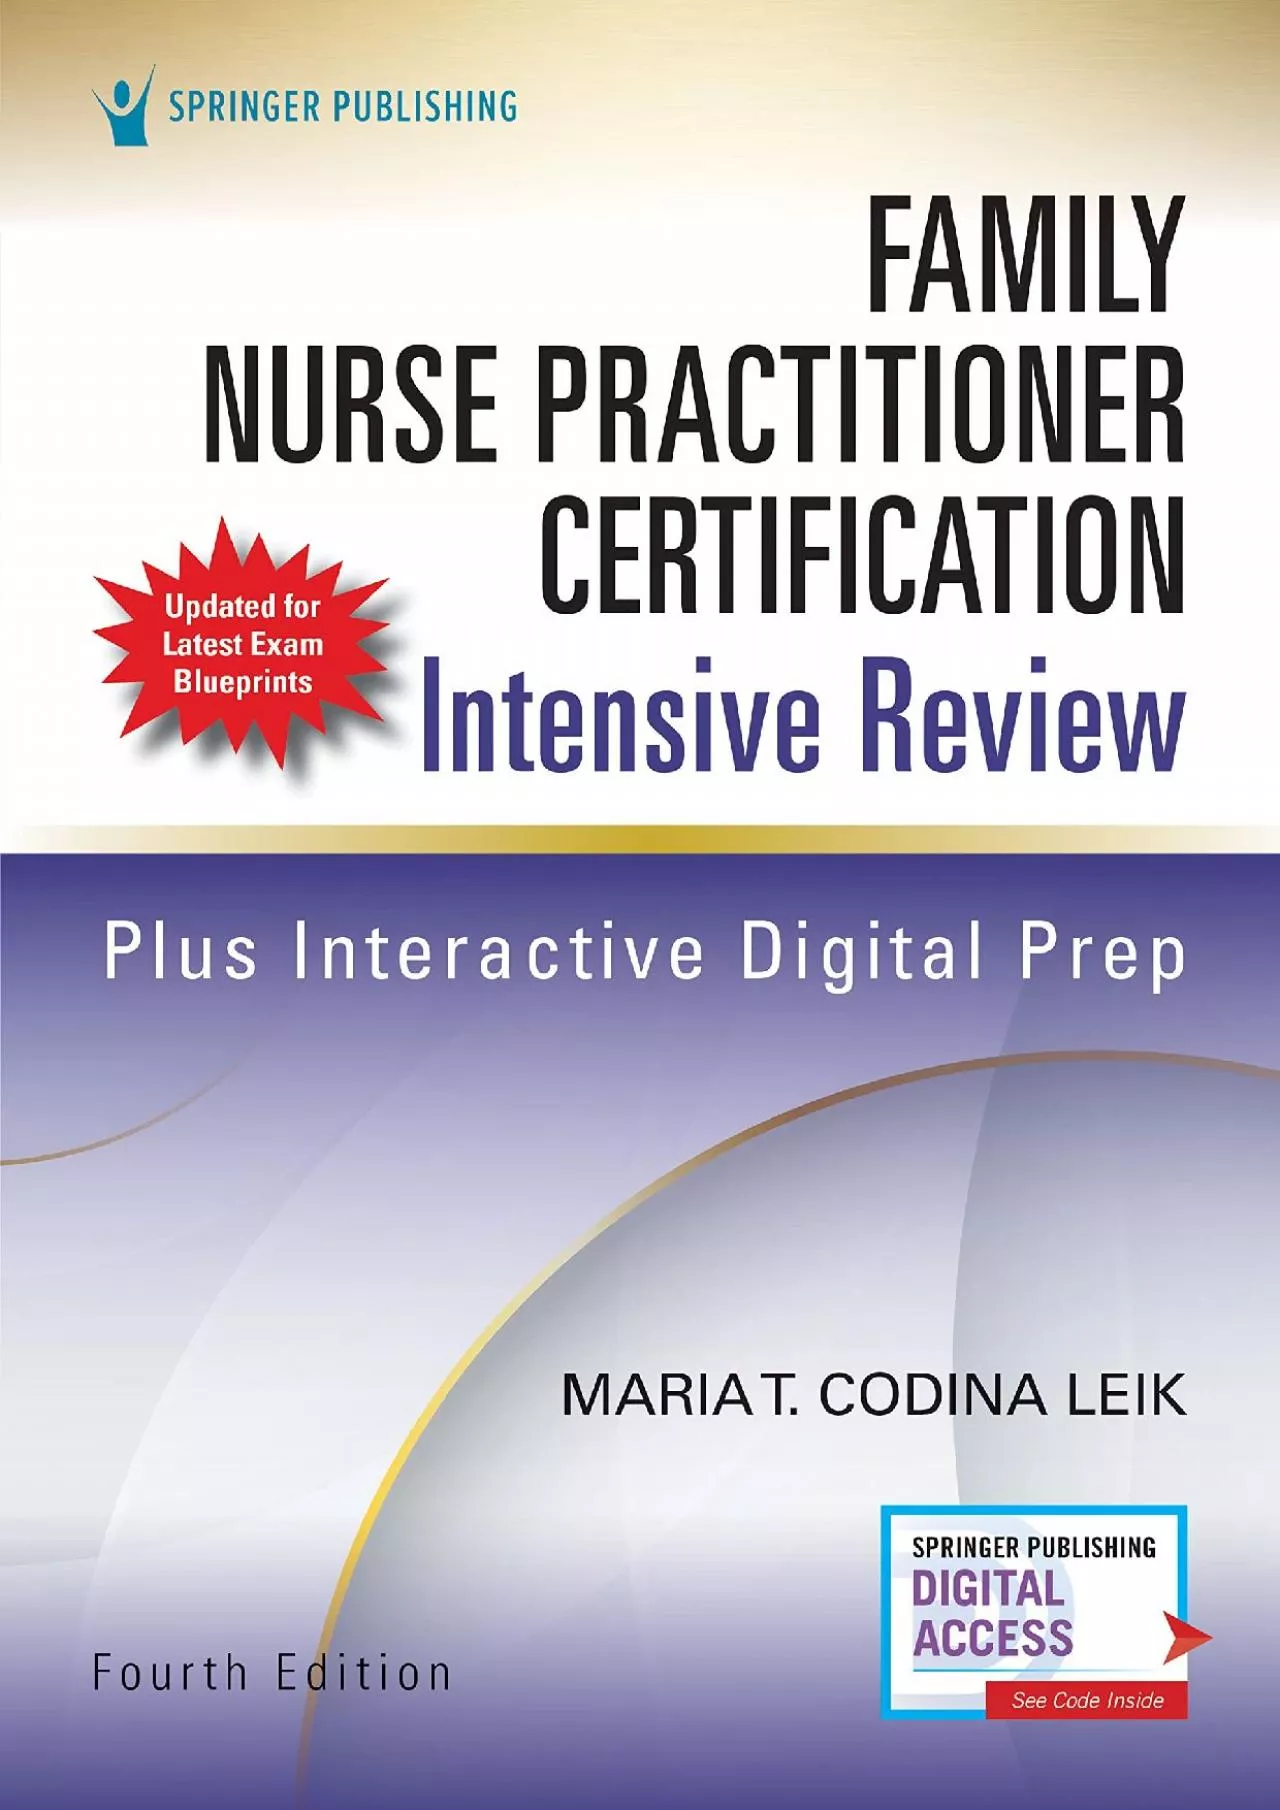 [EBOOK] Family Nurse Practitioner Certification Intensive Review, Fourth Edition – Comprehensive